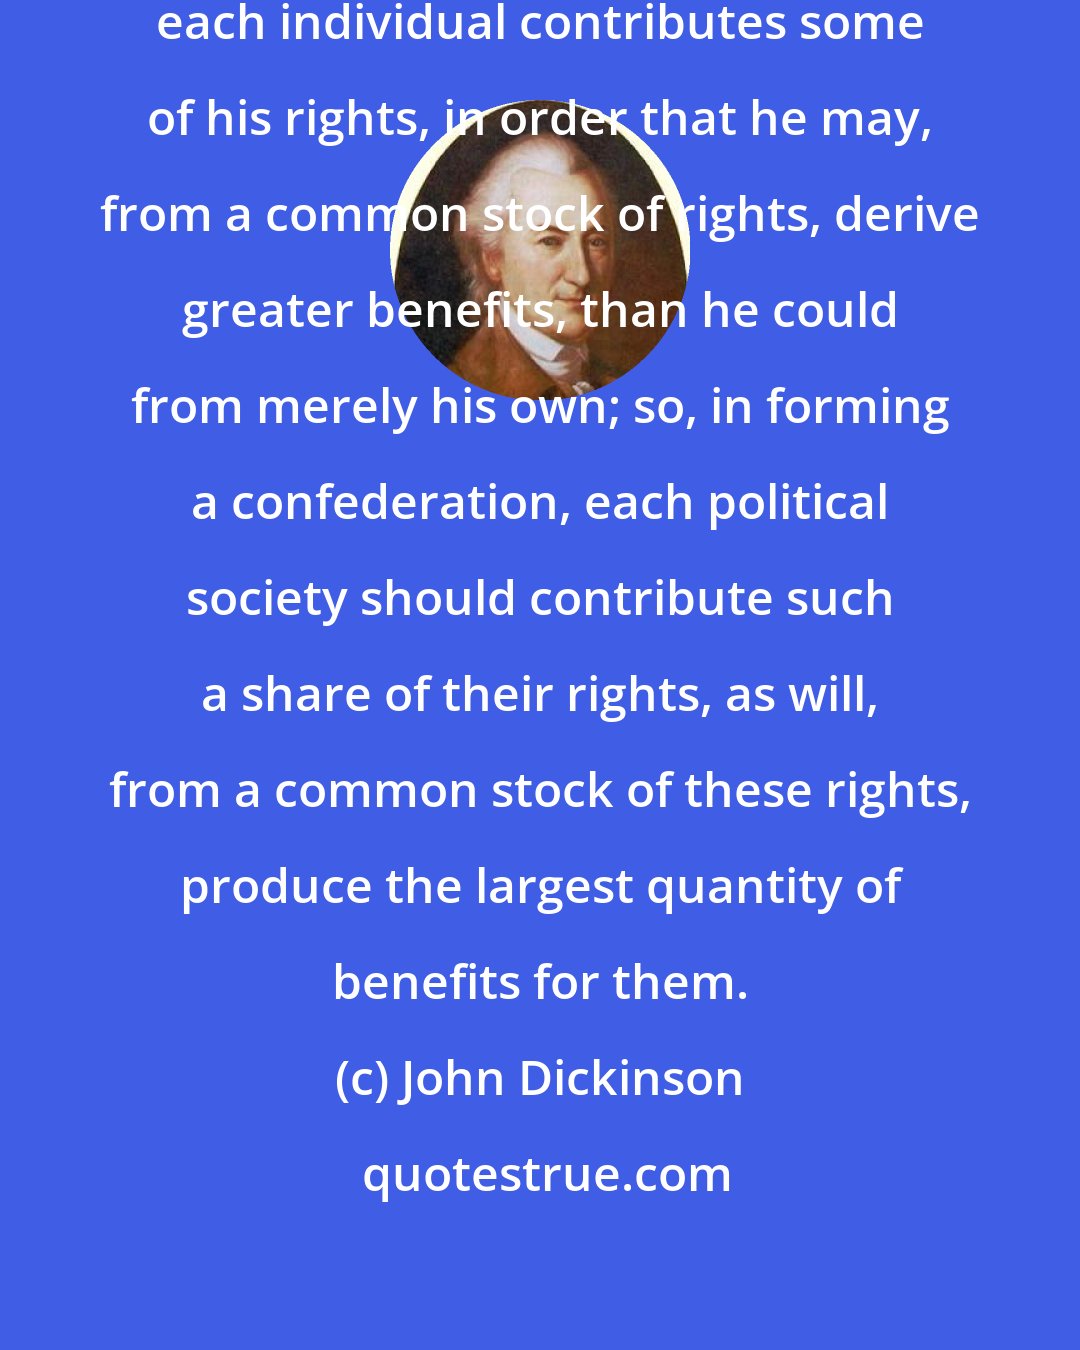 John Dickinson: As in forming a political society, each individual contributes some of his rights, in order that he may, from a common stock of rights, derive greater benefits, than he could from merely his own; so, in forming a confederation, each political society should contribute such a share of their rights, as will, from a common stock of these rights, produce the largest quantity of benefits for them.